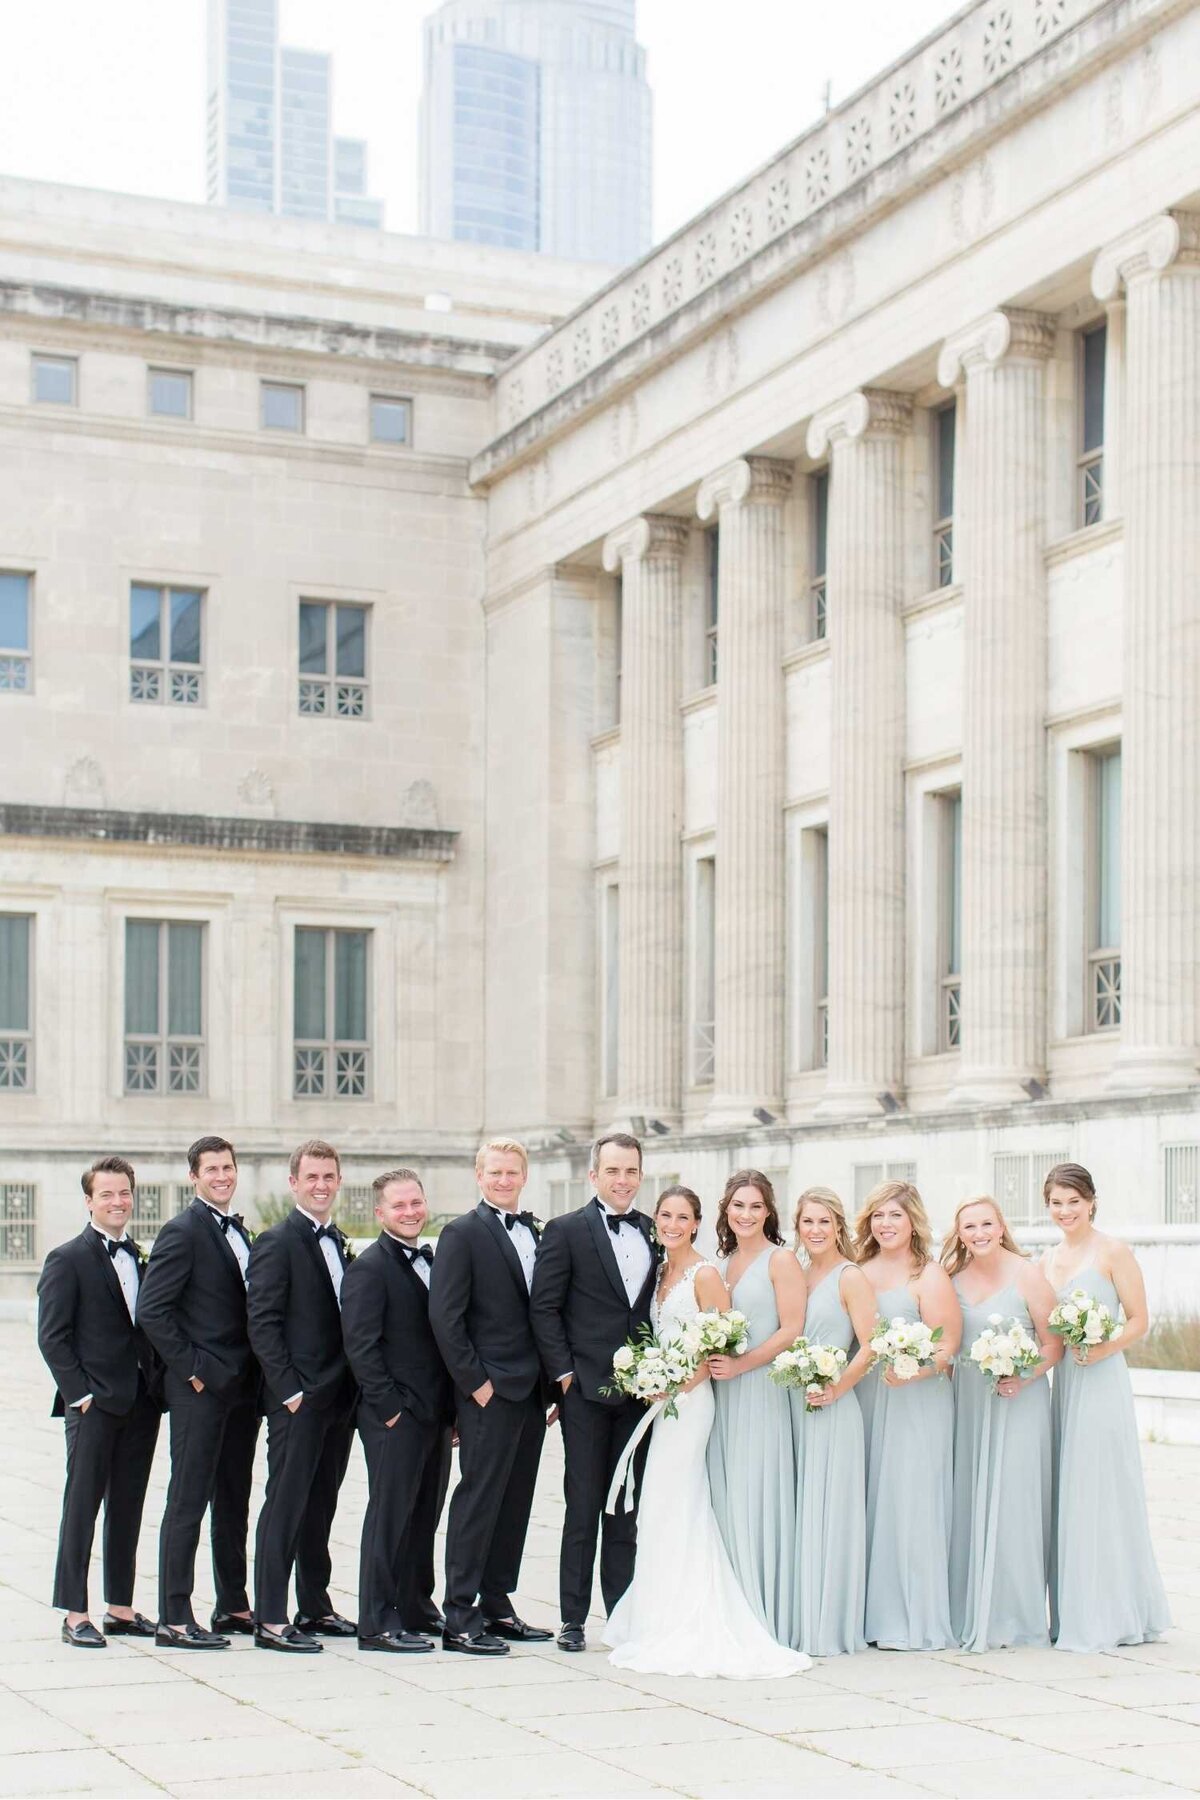 Wedding Party portrait at museum campus before a Luxury Chicago Outdoor Historic Wedding Venue.